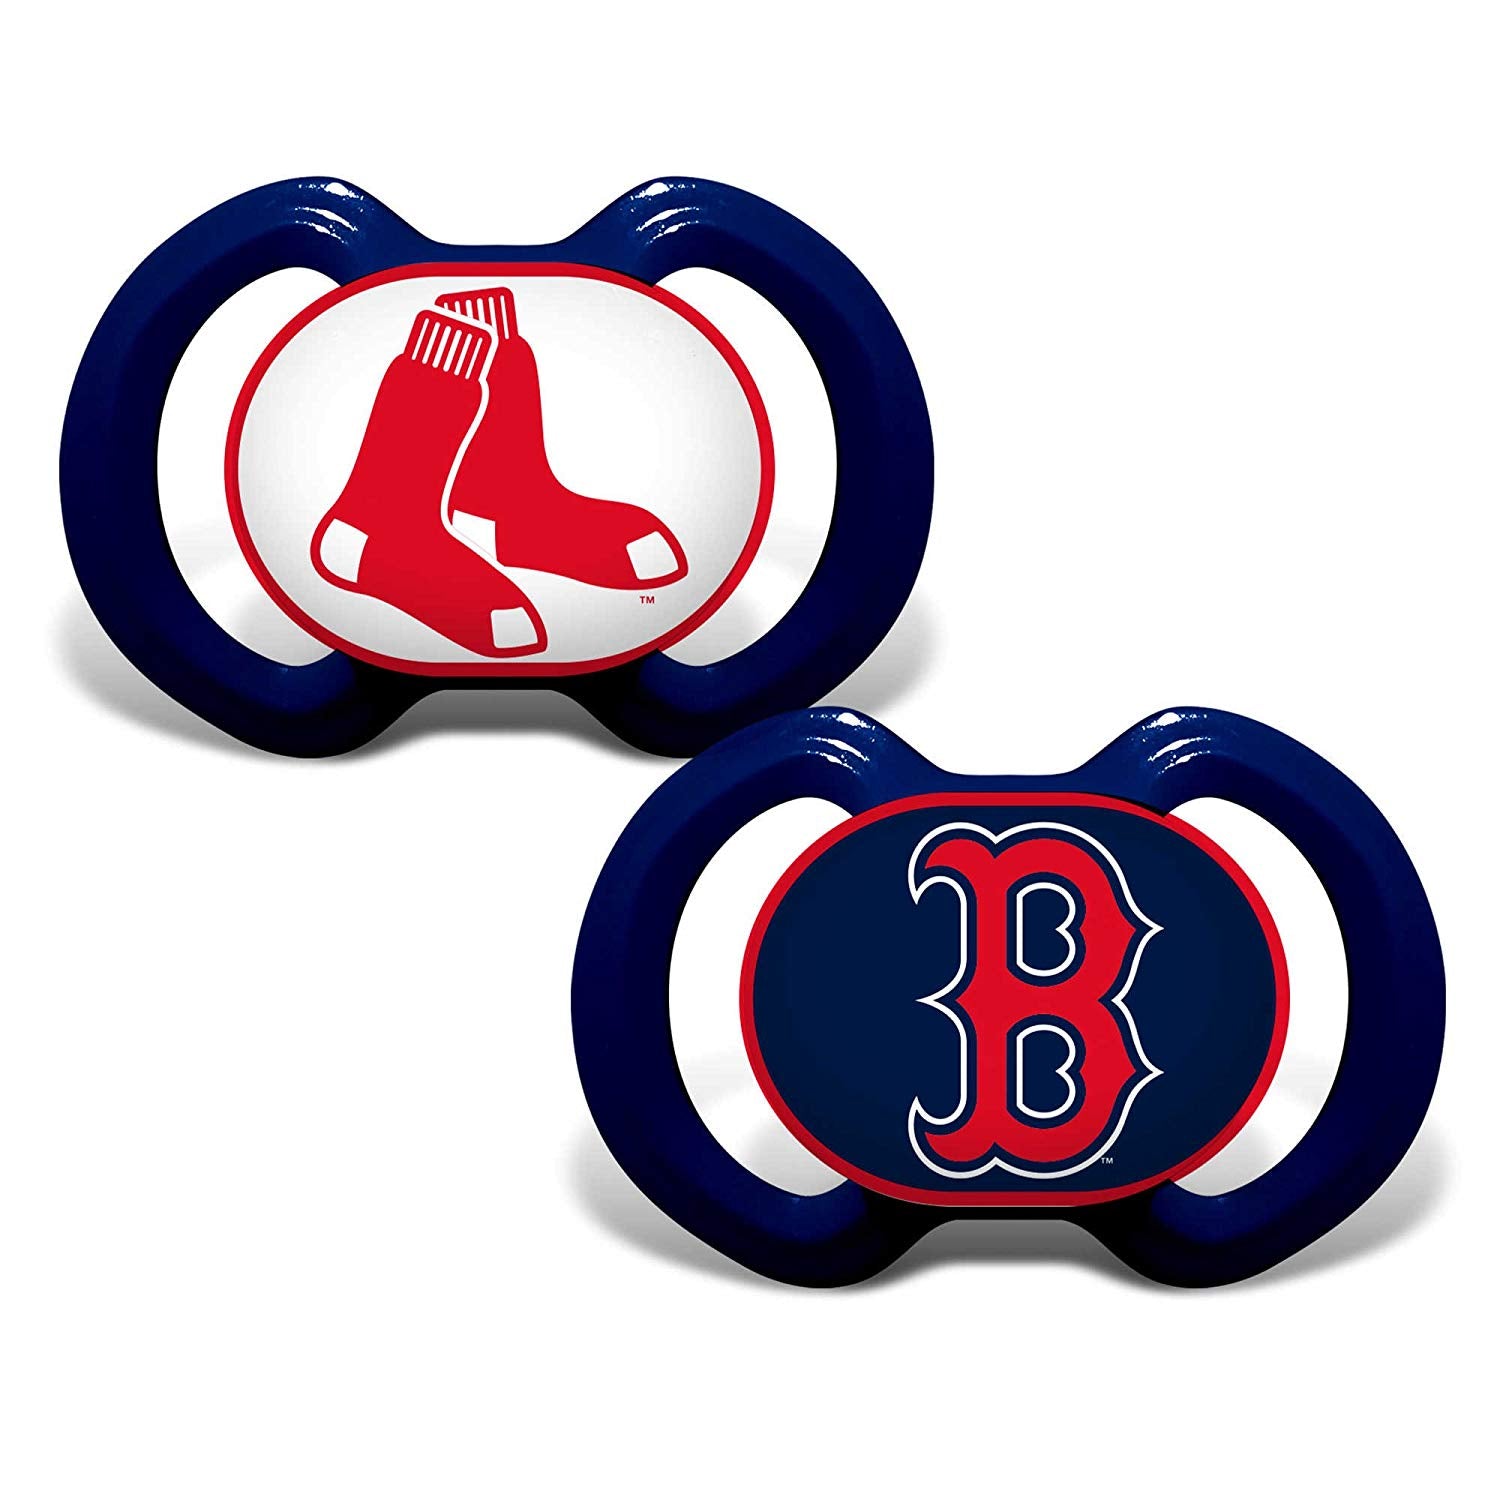 Official MLB Fan Shop Authentic Baby Pacifier and Bib Set. Start the Little Ones Out Early in Joining the Number One Major League Baseball Fans